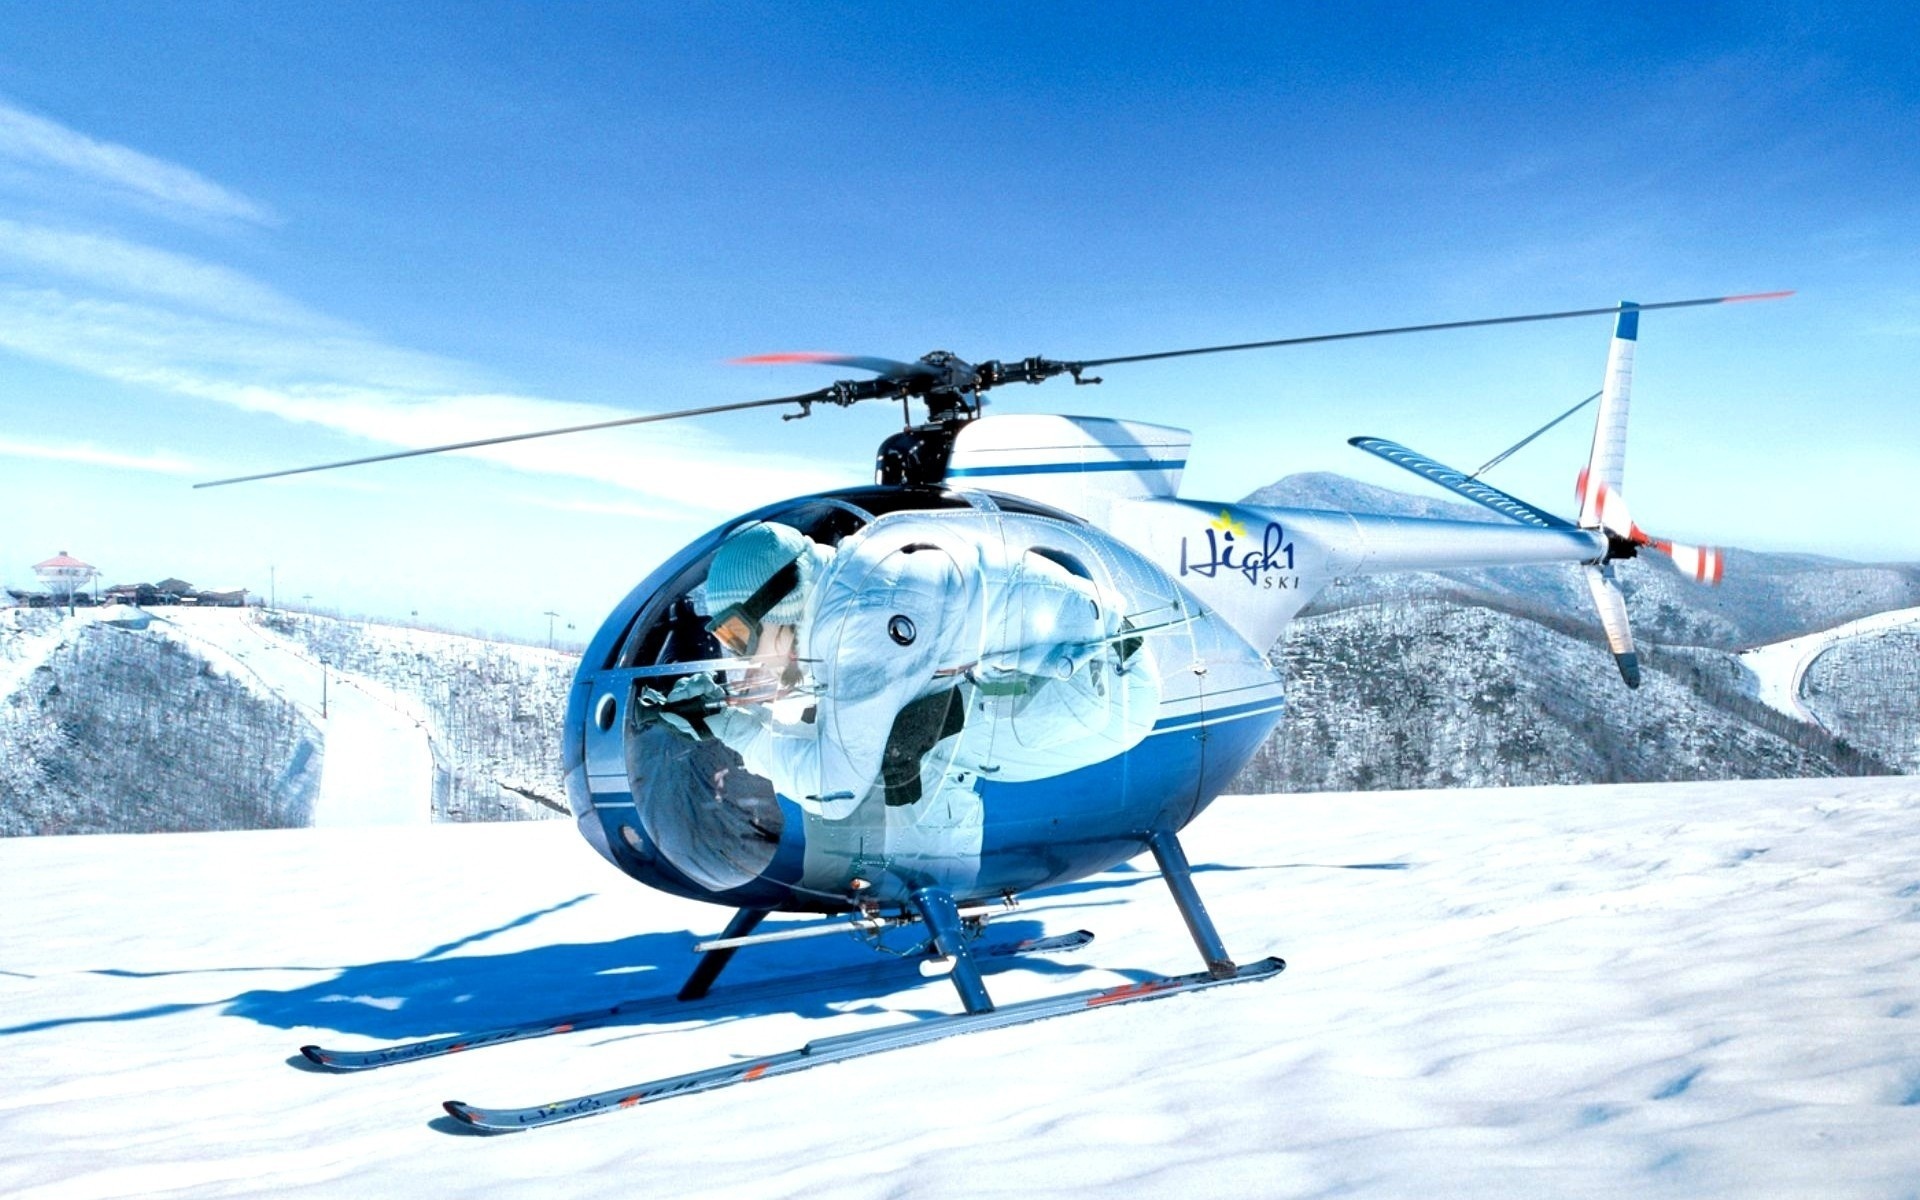 Mini Helicopters On The Snow Capped Mountain